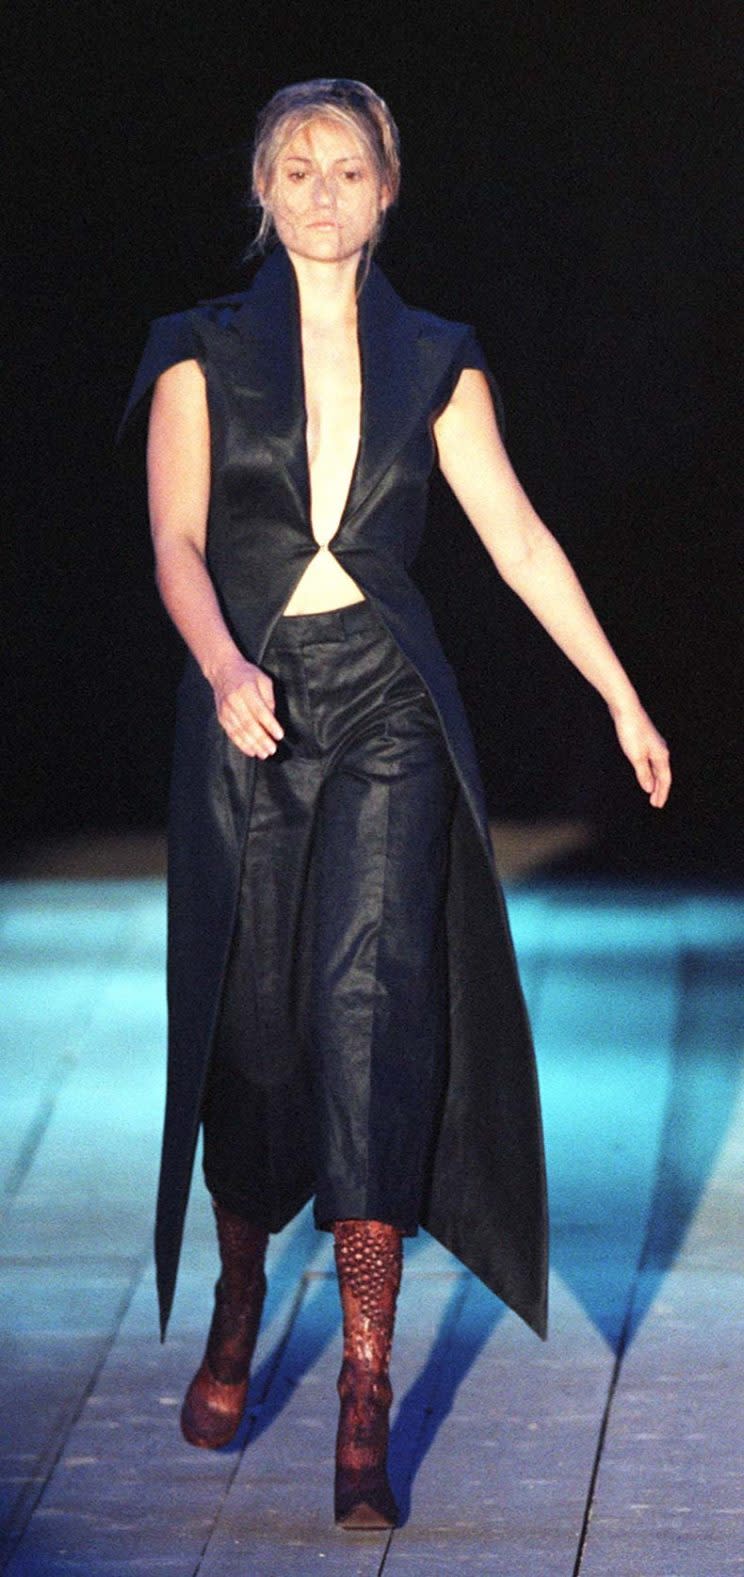 Double amputee Aimee Mullins is one of the only disabled models to walk in a fashion show, appearing in Alexander McQueen's 1998 show. [Photo: PA]